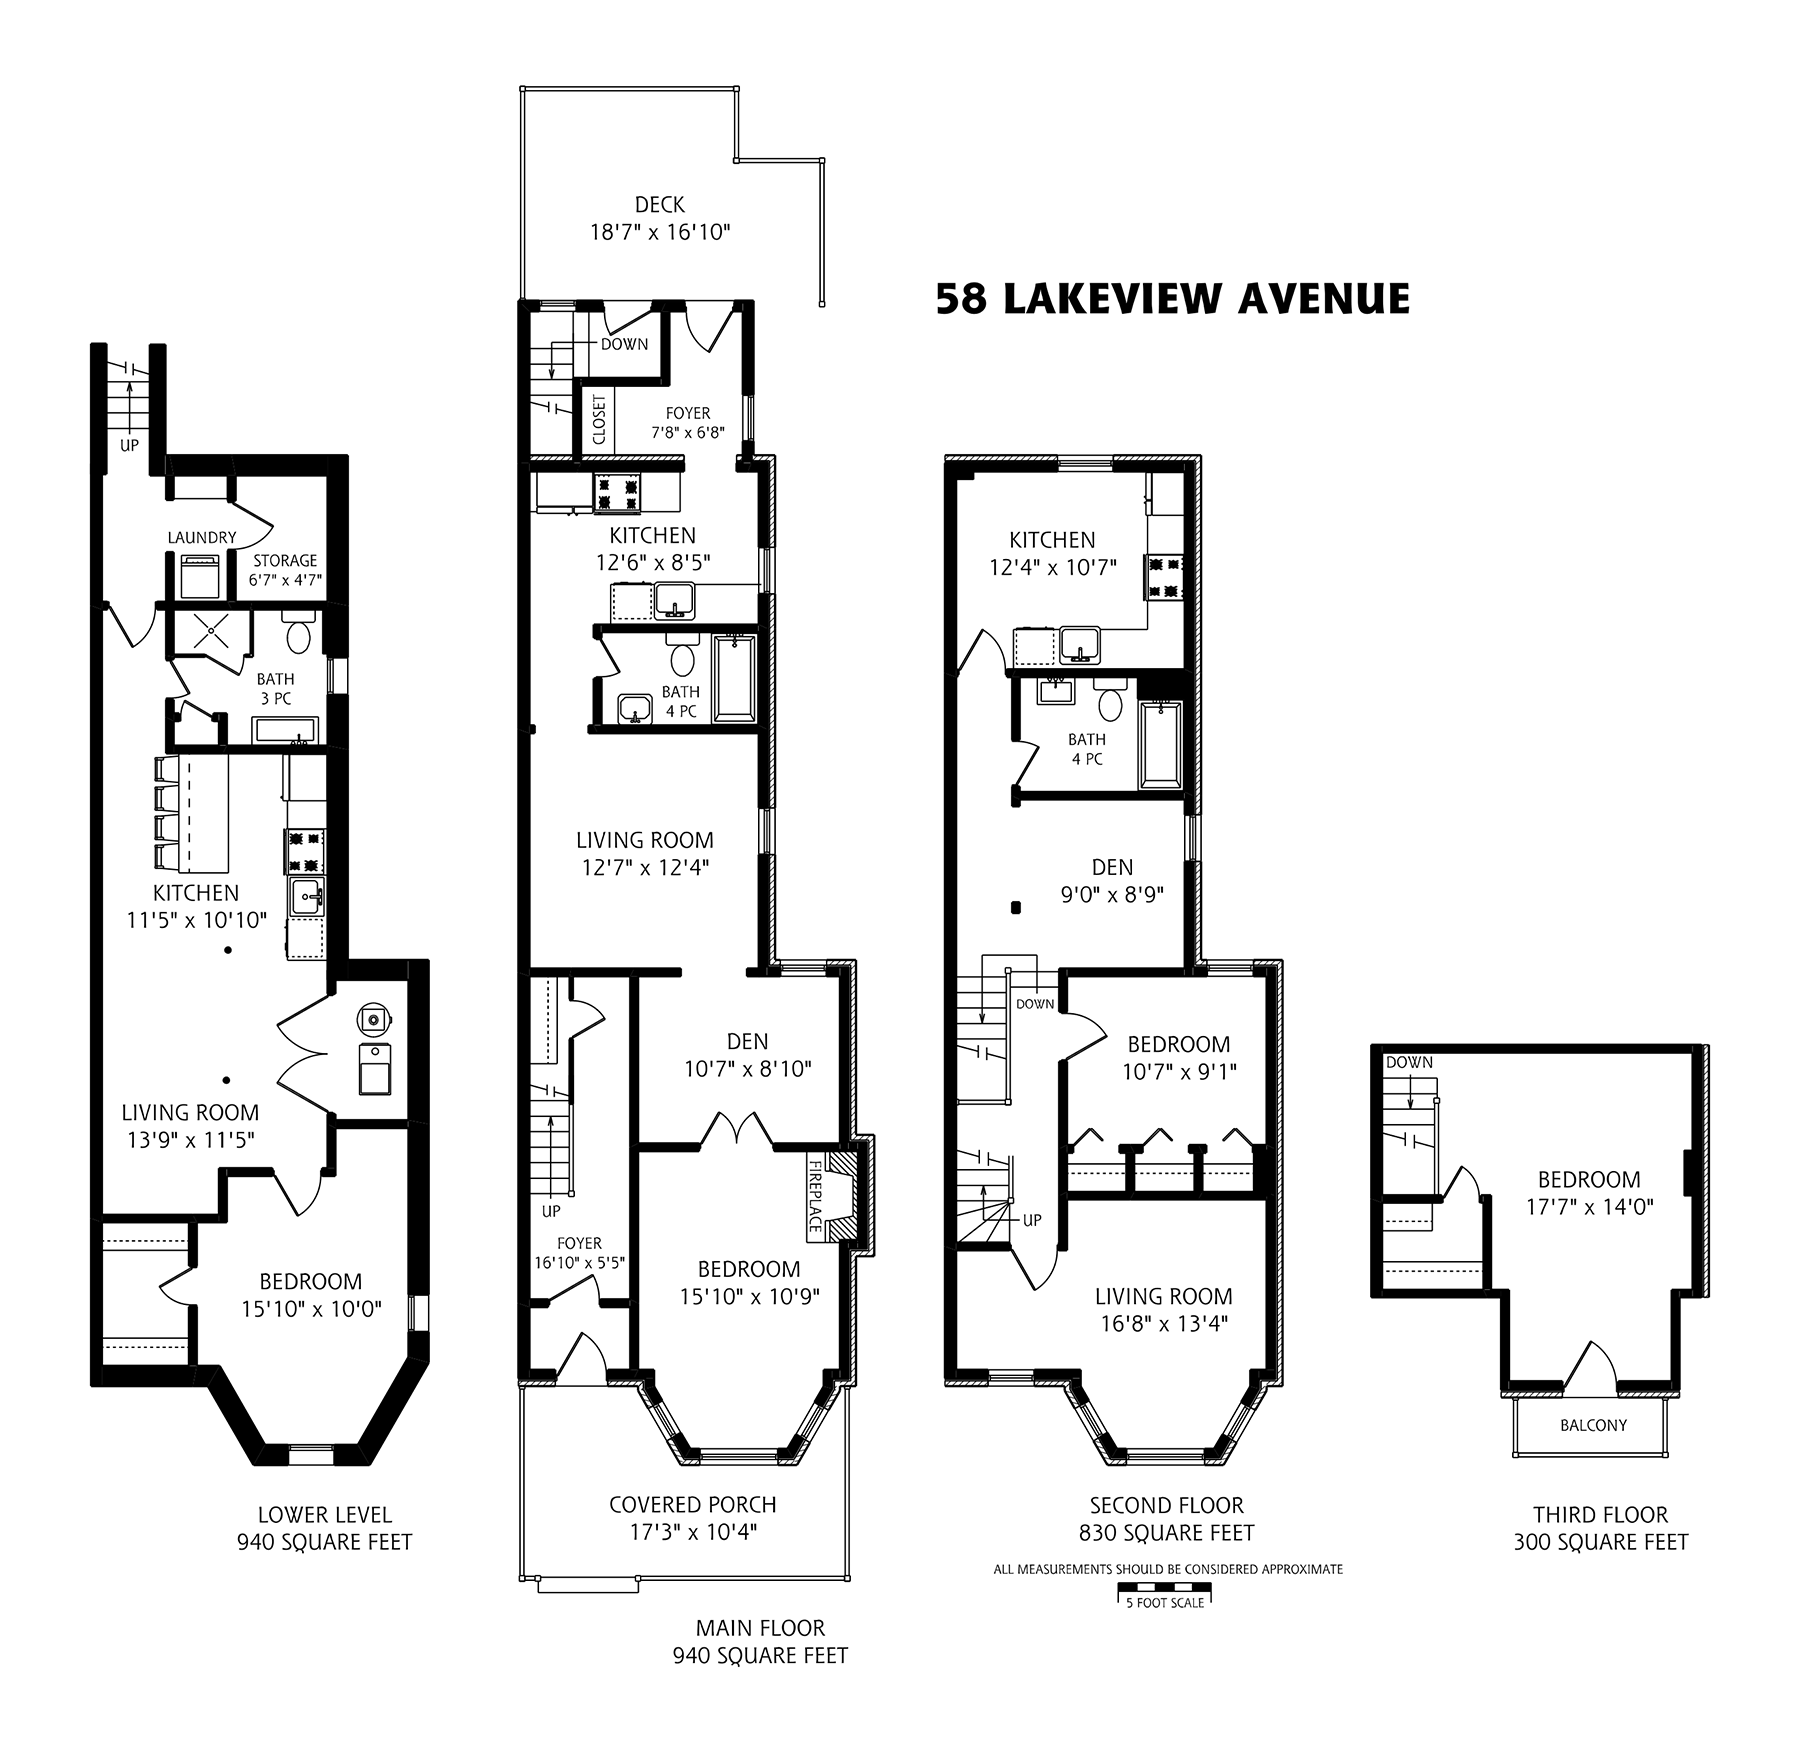 58 Lakeview Ave - Floor Plans.png